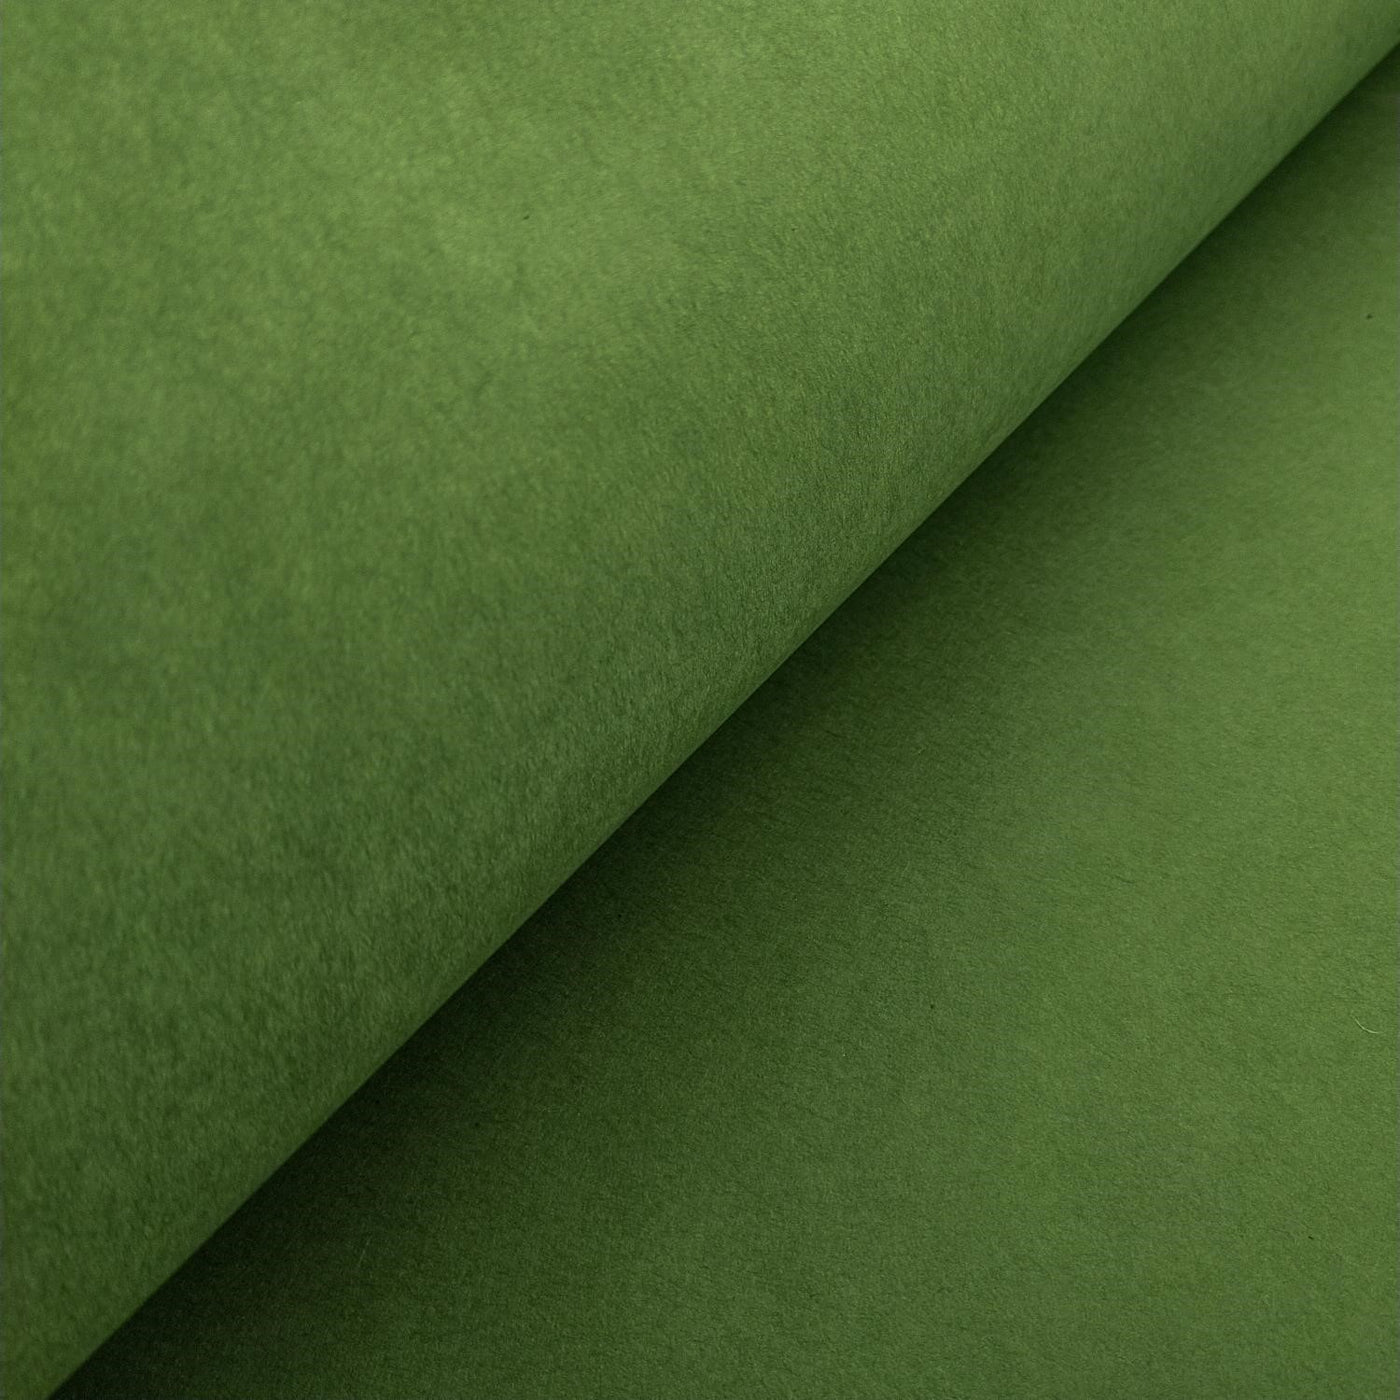 Solid-Colored Kozo Mulberry Paper (Fern Green)